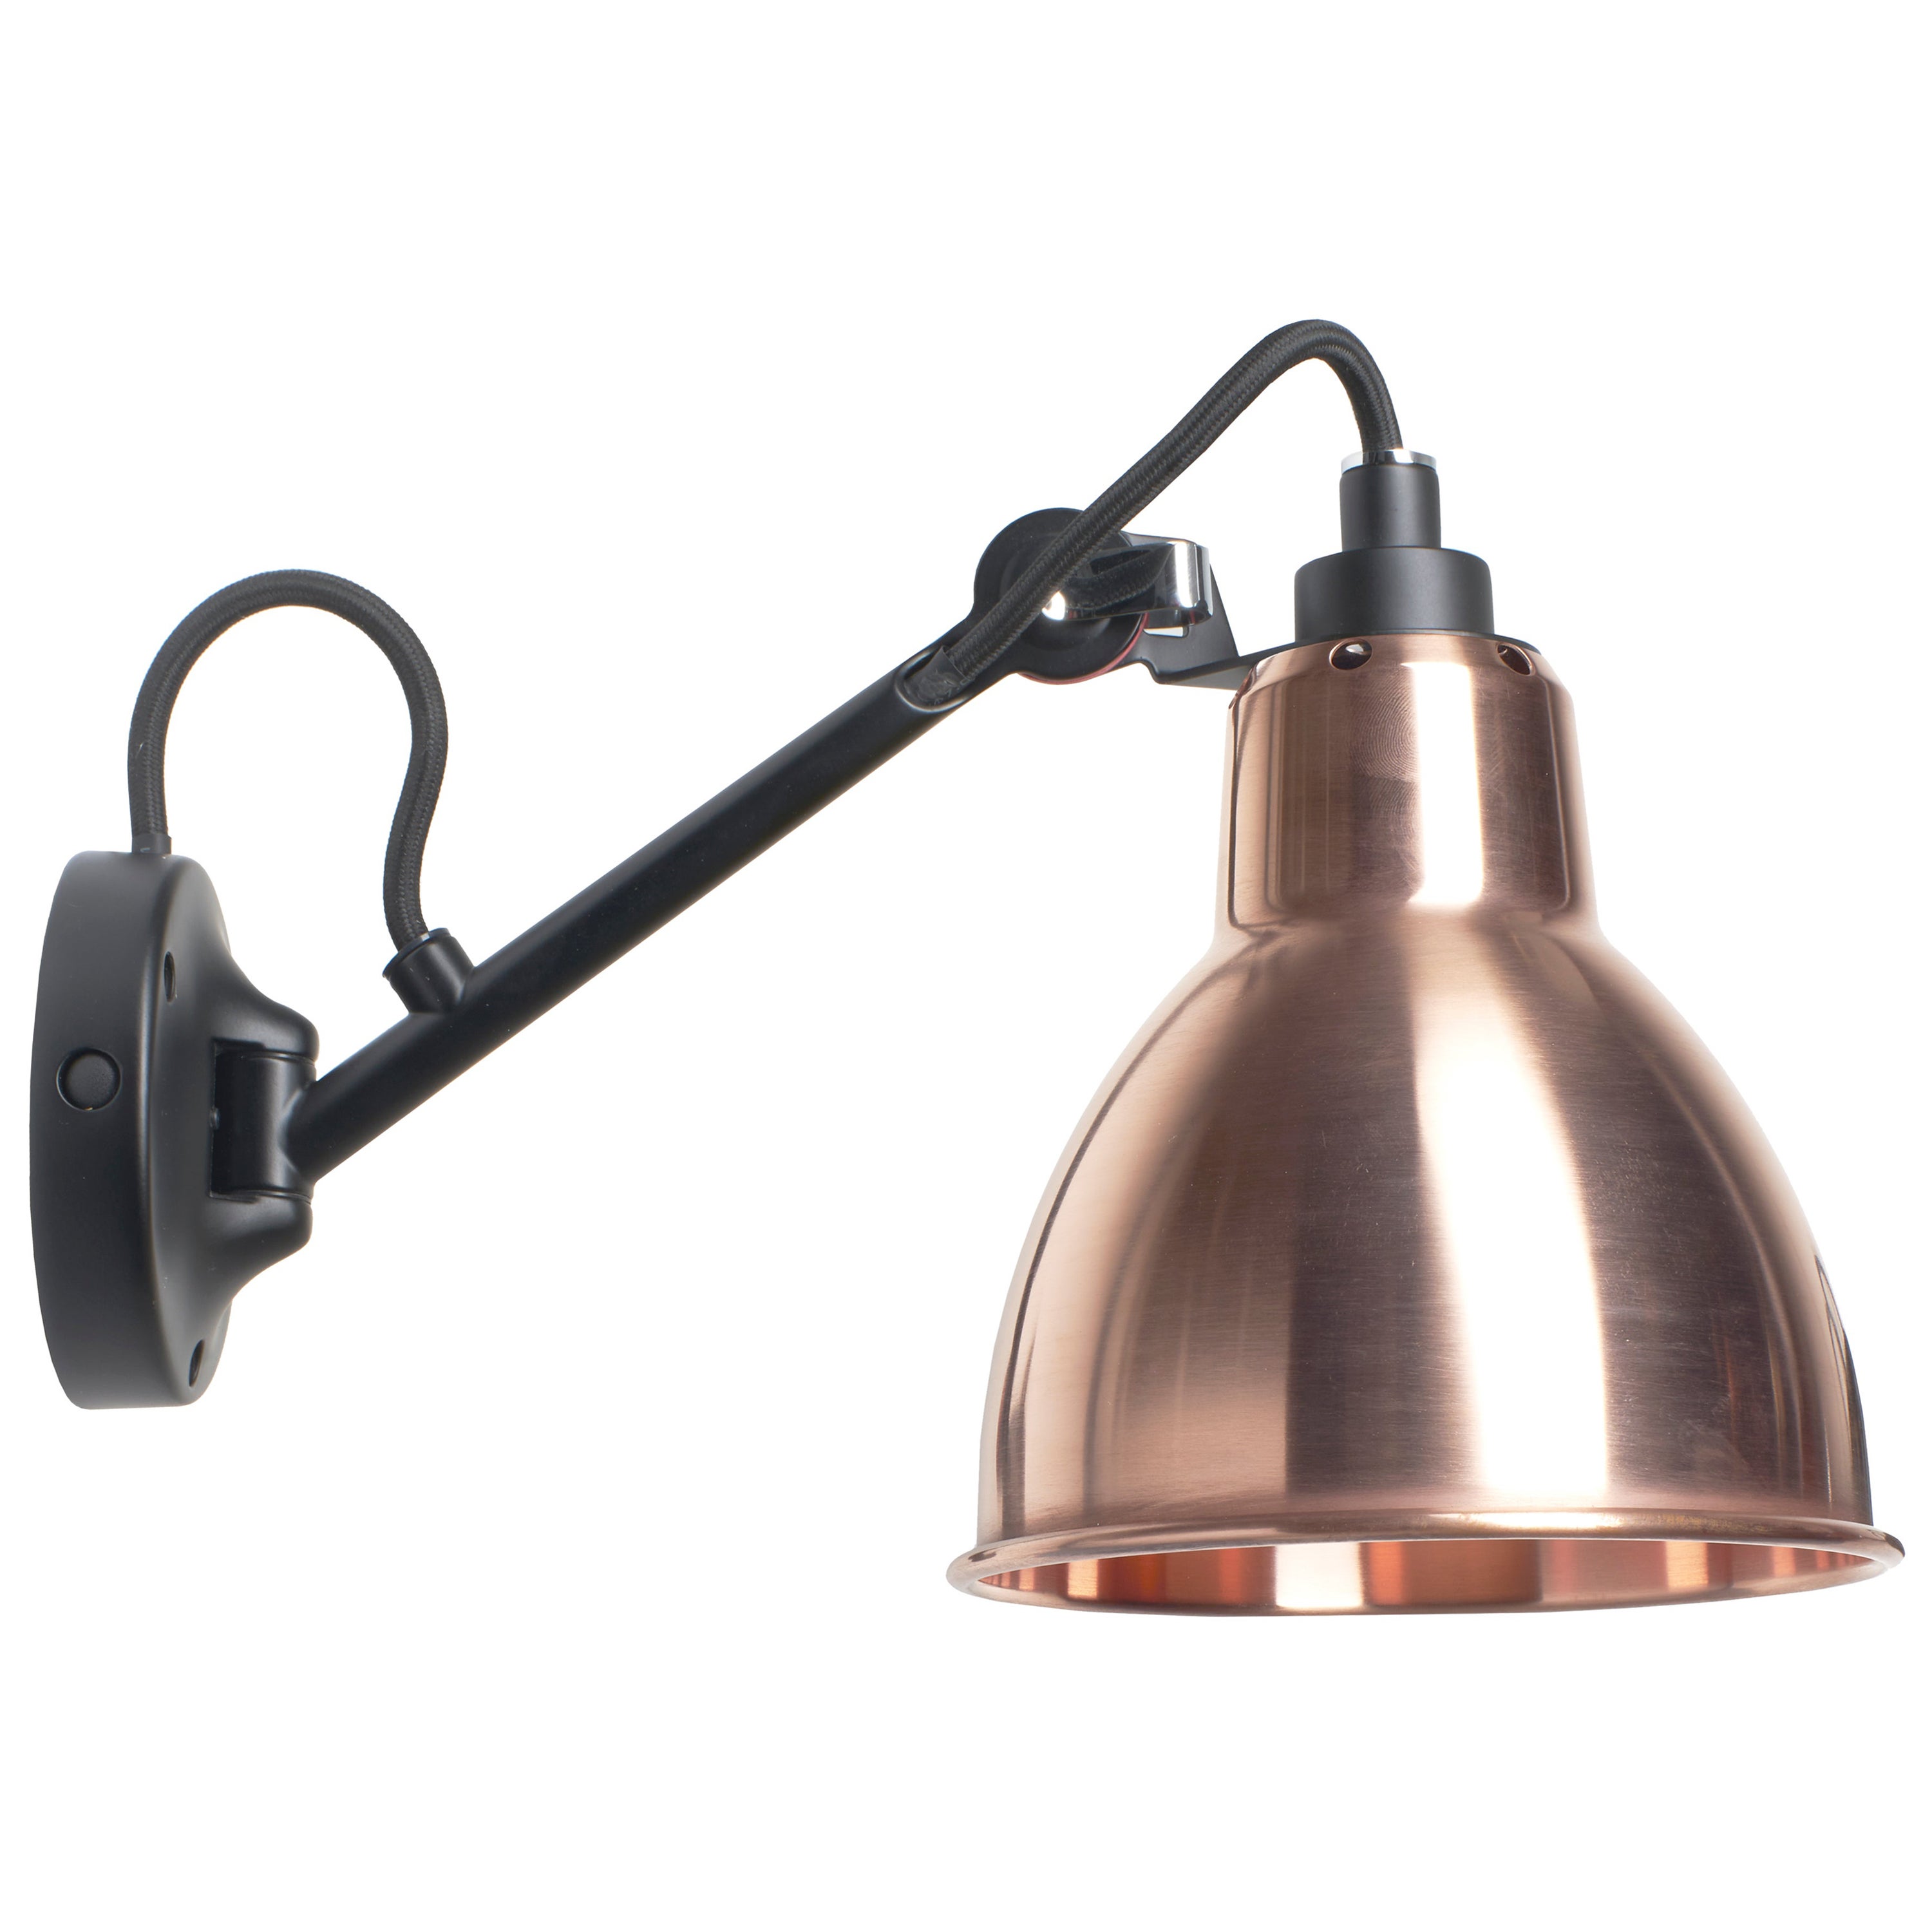 DCW Editions La Lampe Gras N°104 Wall Lamp in Black Arm and Raw Copper Shade